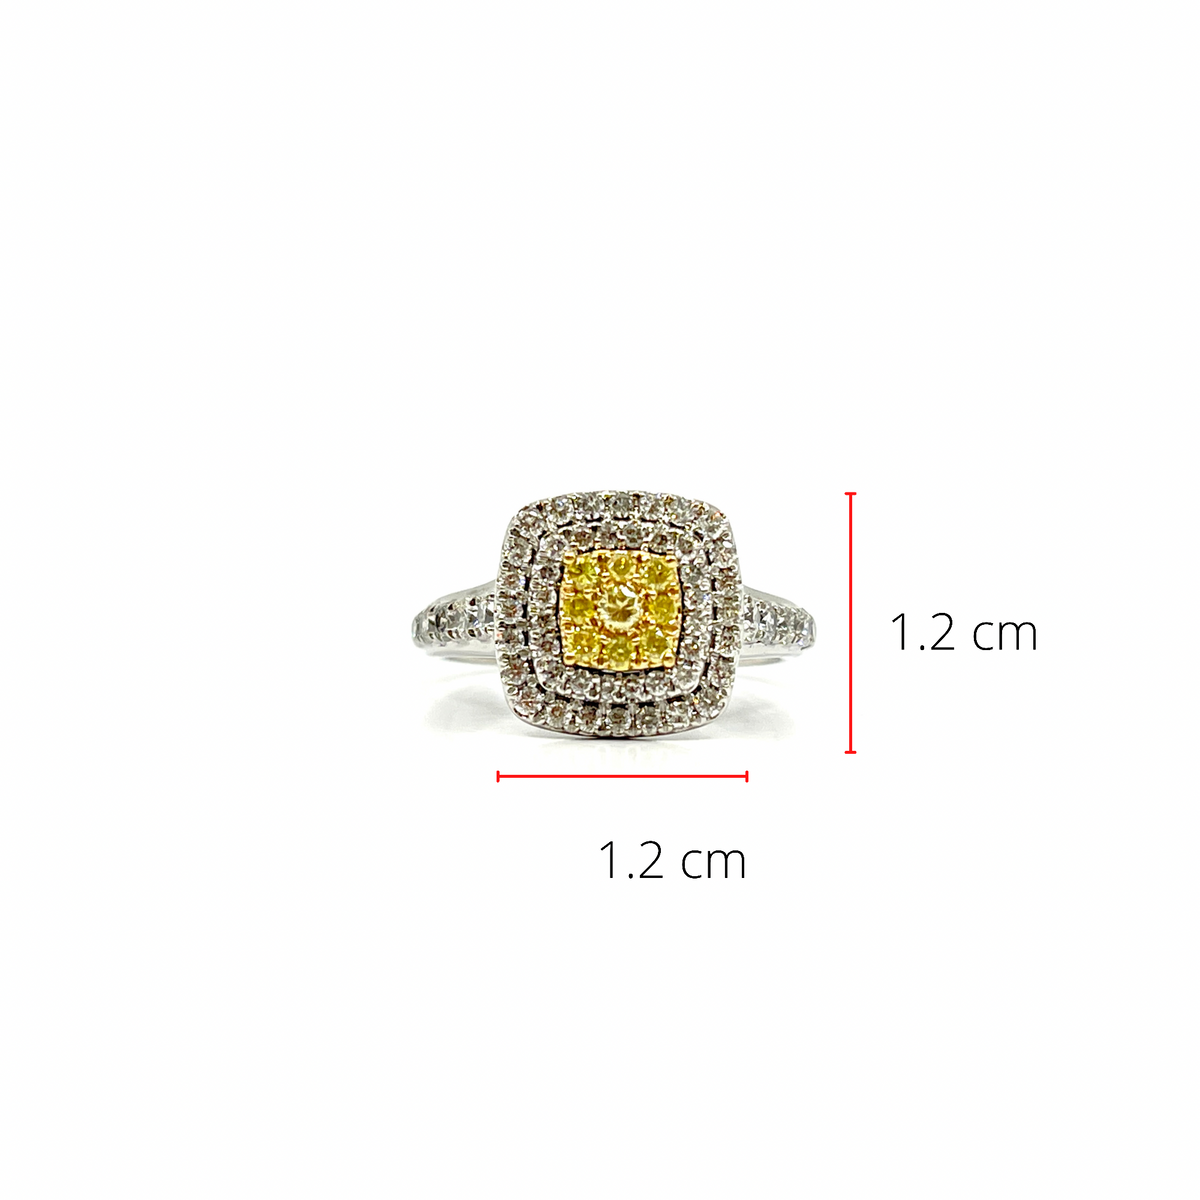 14K White Gold 1.05cttw Fancy Yellow and White Diamond Halo Engagement Ring, size 6